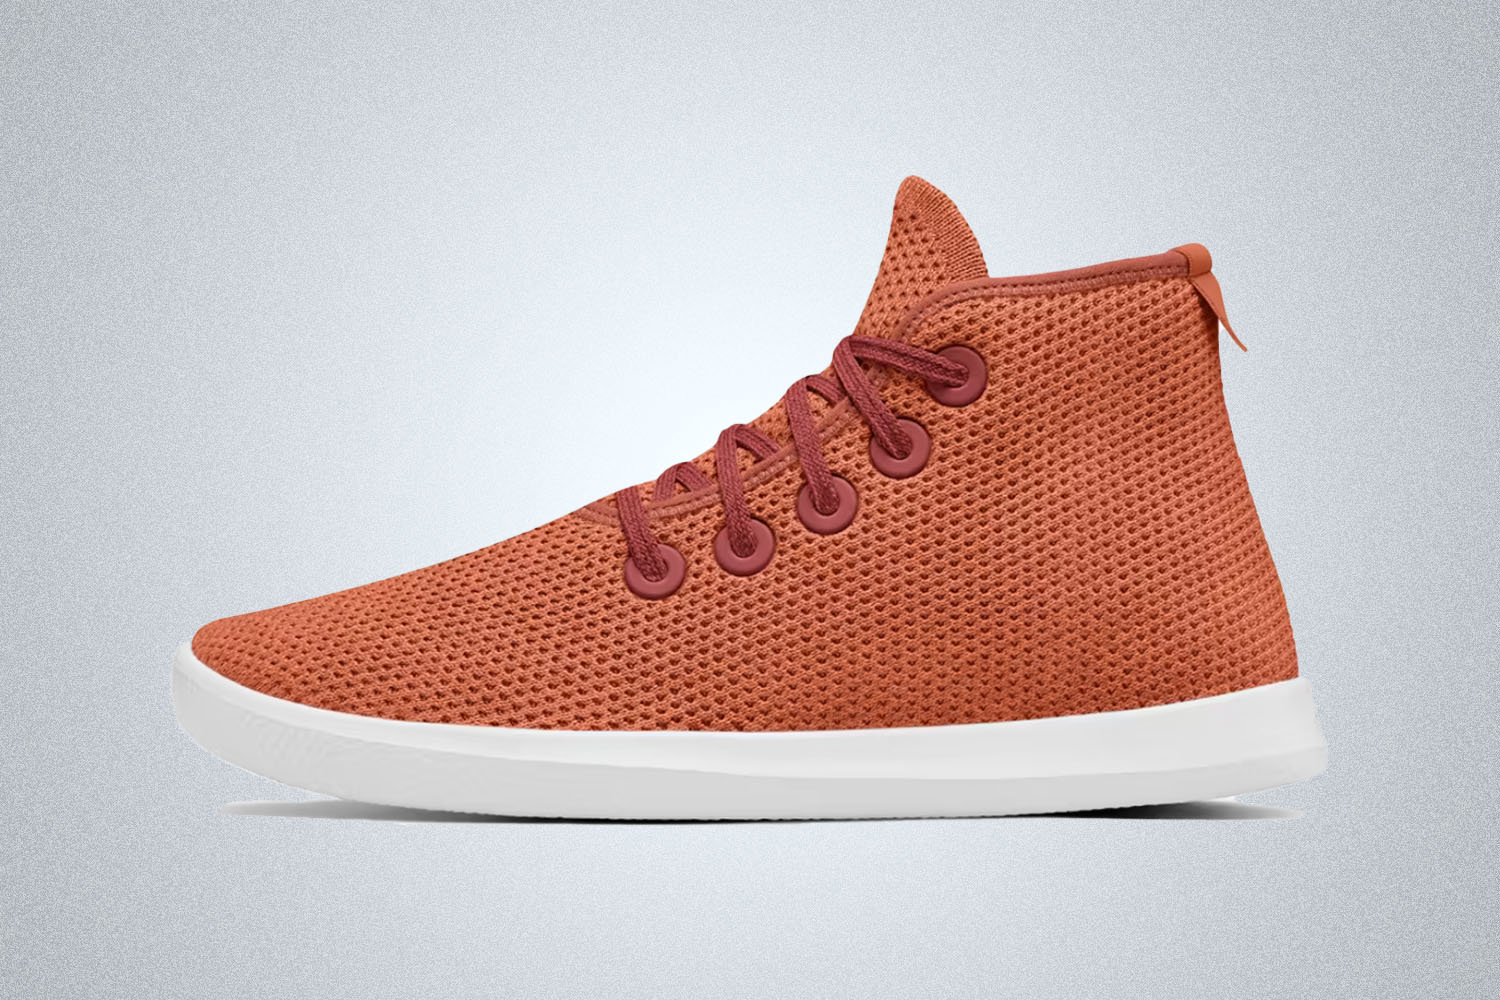 The burnt red Tree Topper sneaker from Allbirds on a grey background